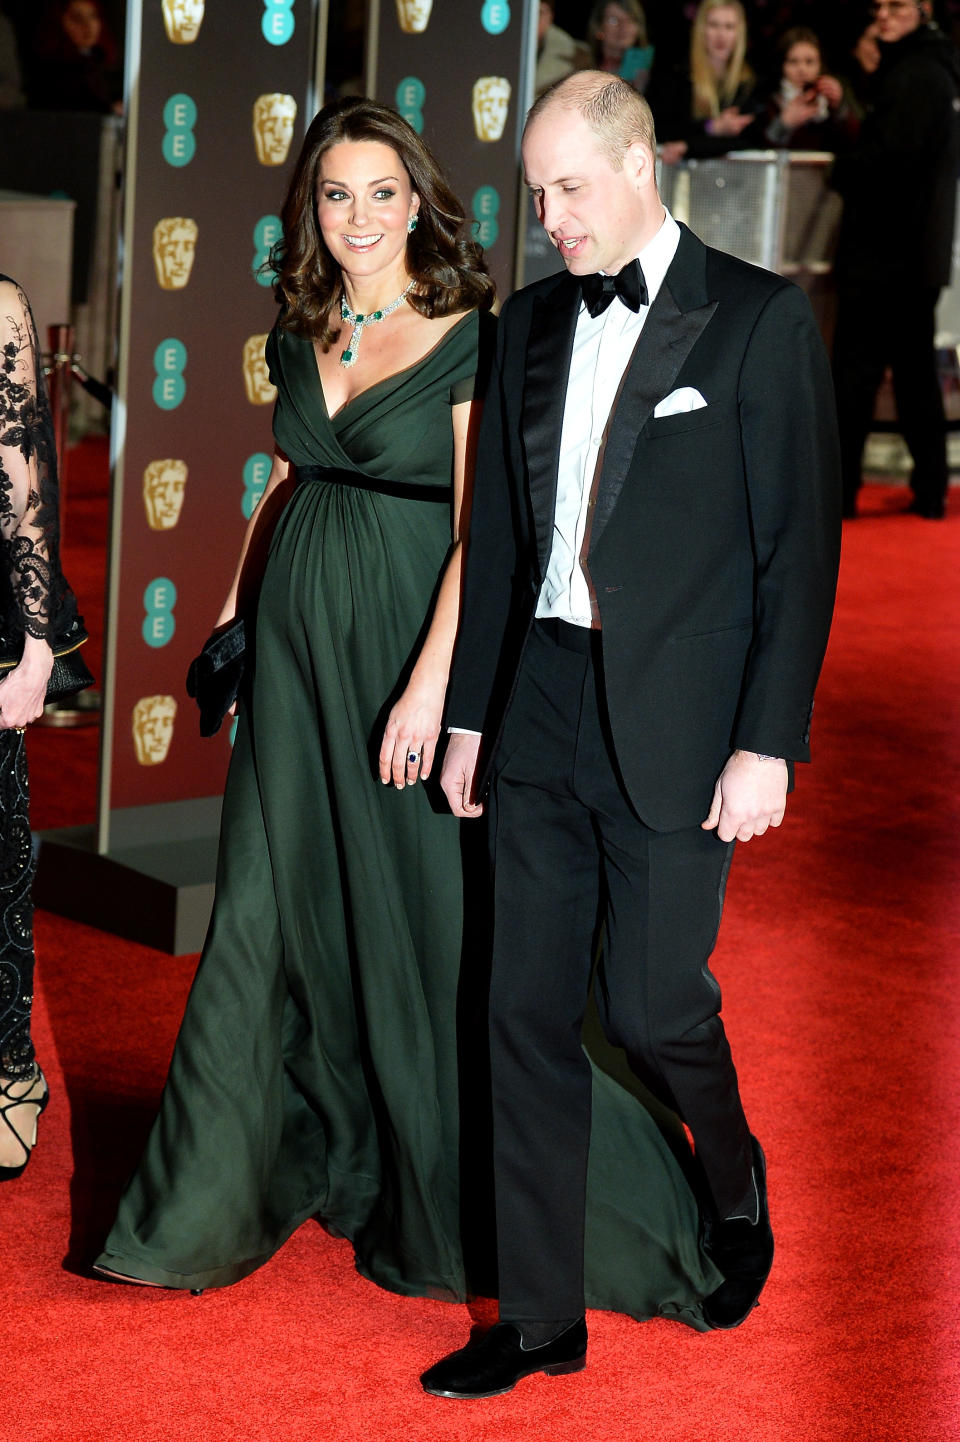 <p>The Duchess of Cambridge chose a forest green Jenny Packham dress for the awards night in 2018 and fans believe the velvet bow was in tribute to the all-black #MeToo dress code. (Getty Images)</p> 